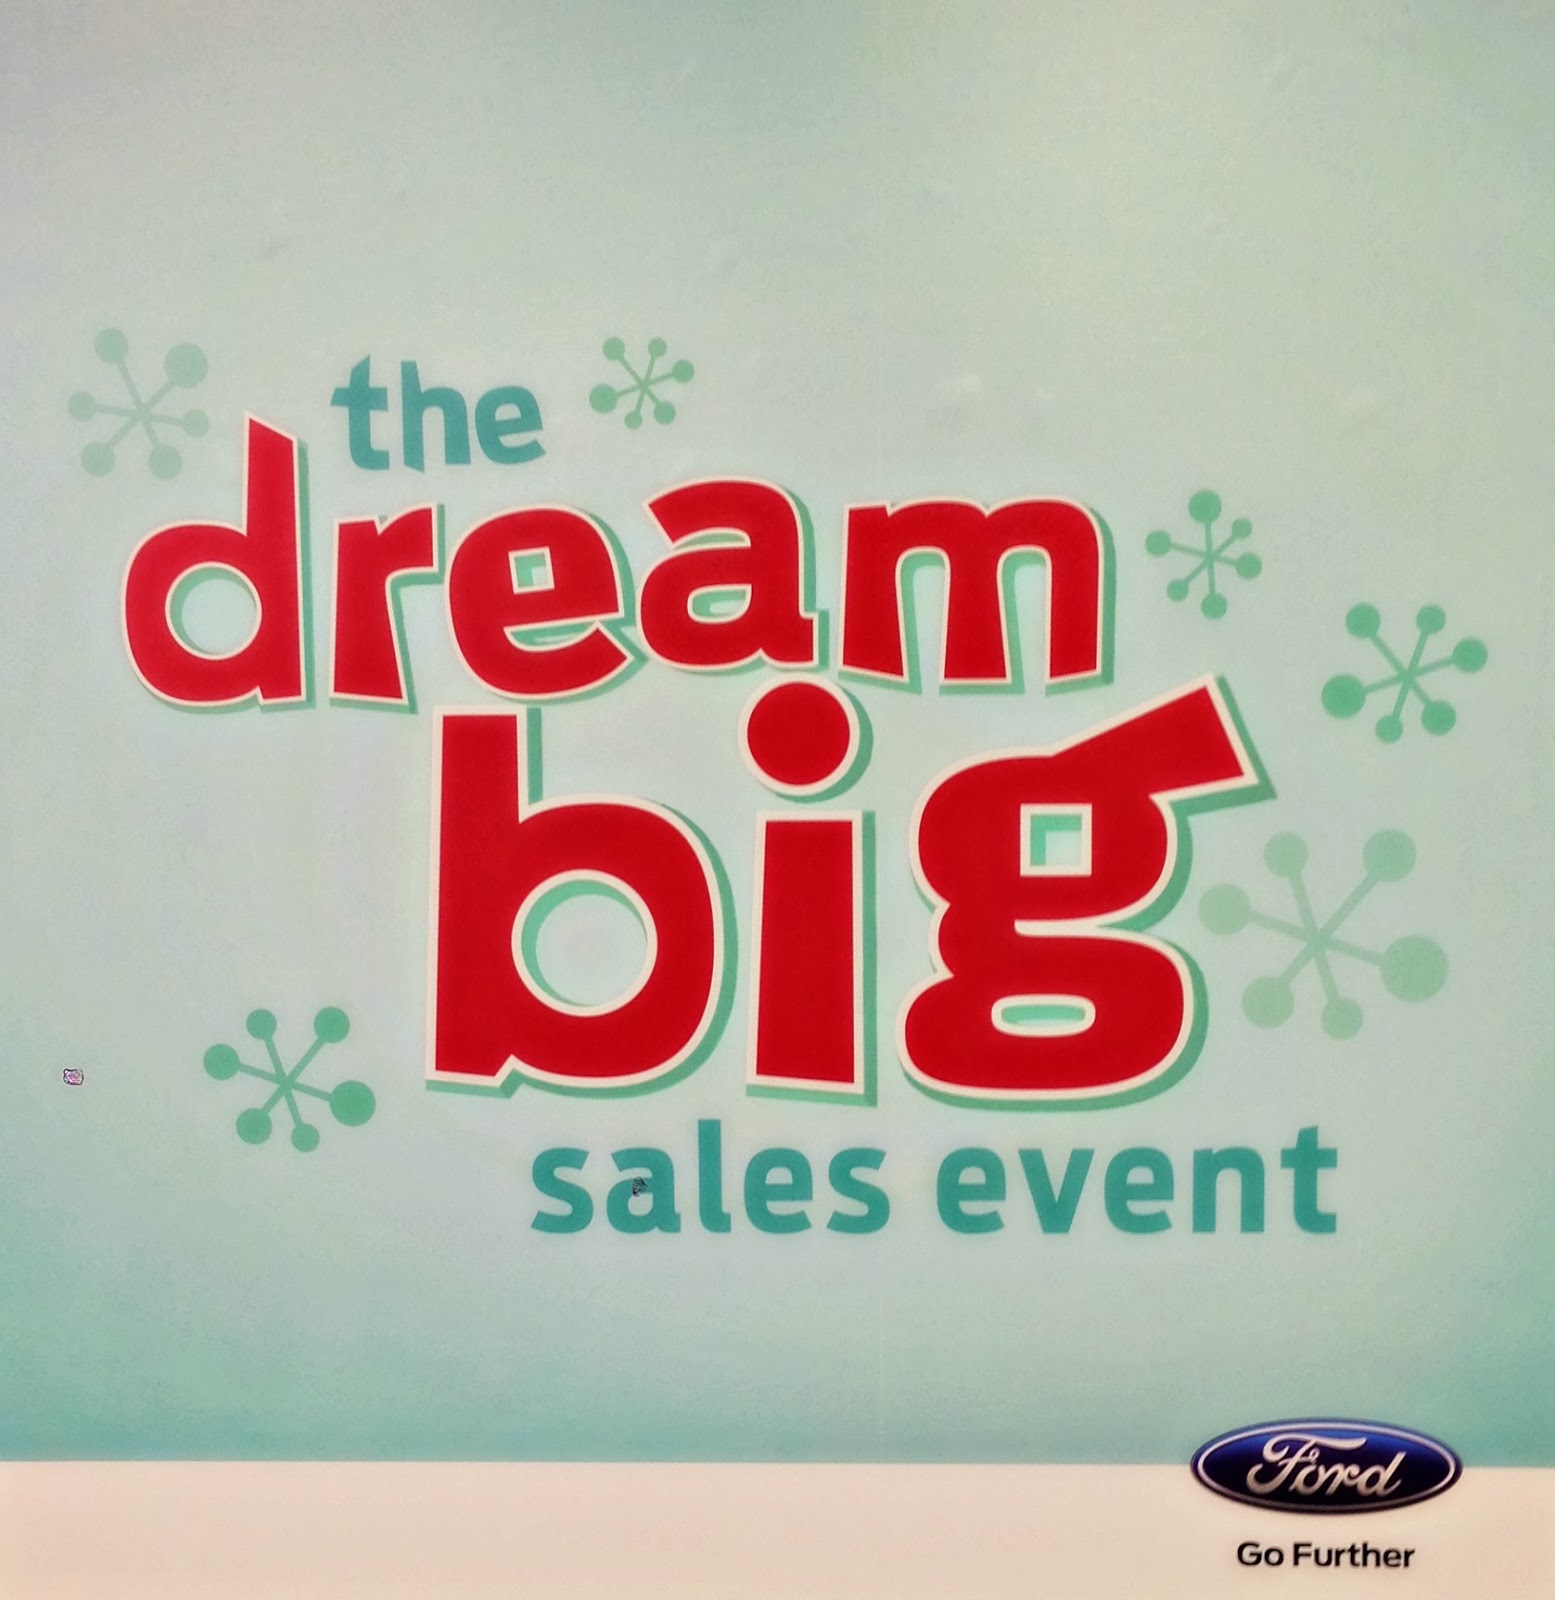 The dream big sales event ford #5